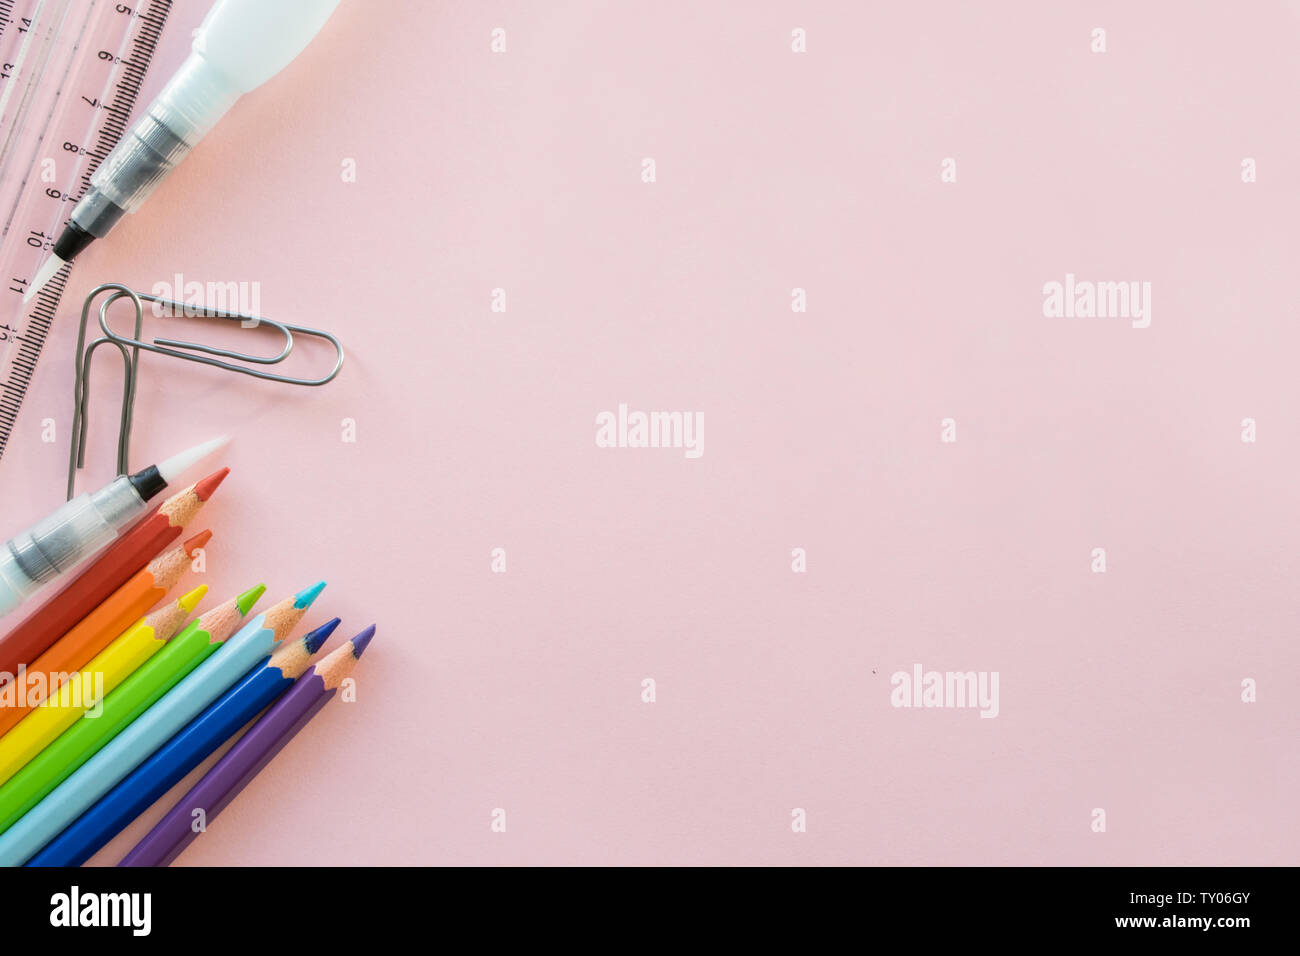 School drawing supplies on pink background. Free space Stock Photo